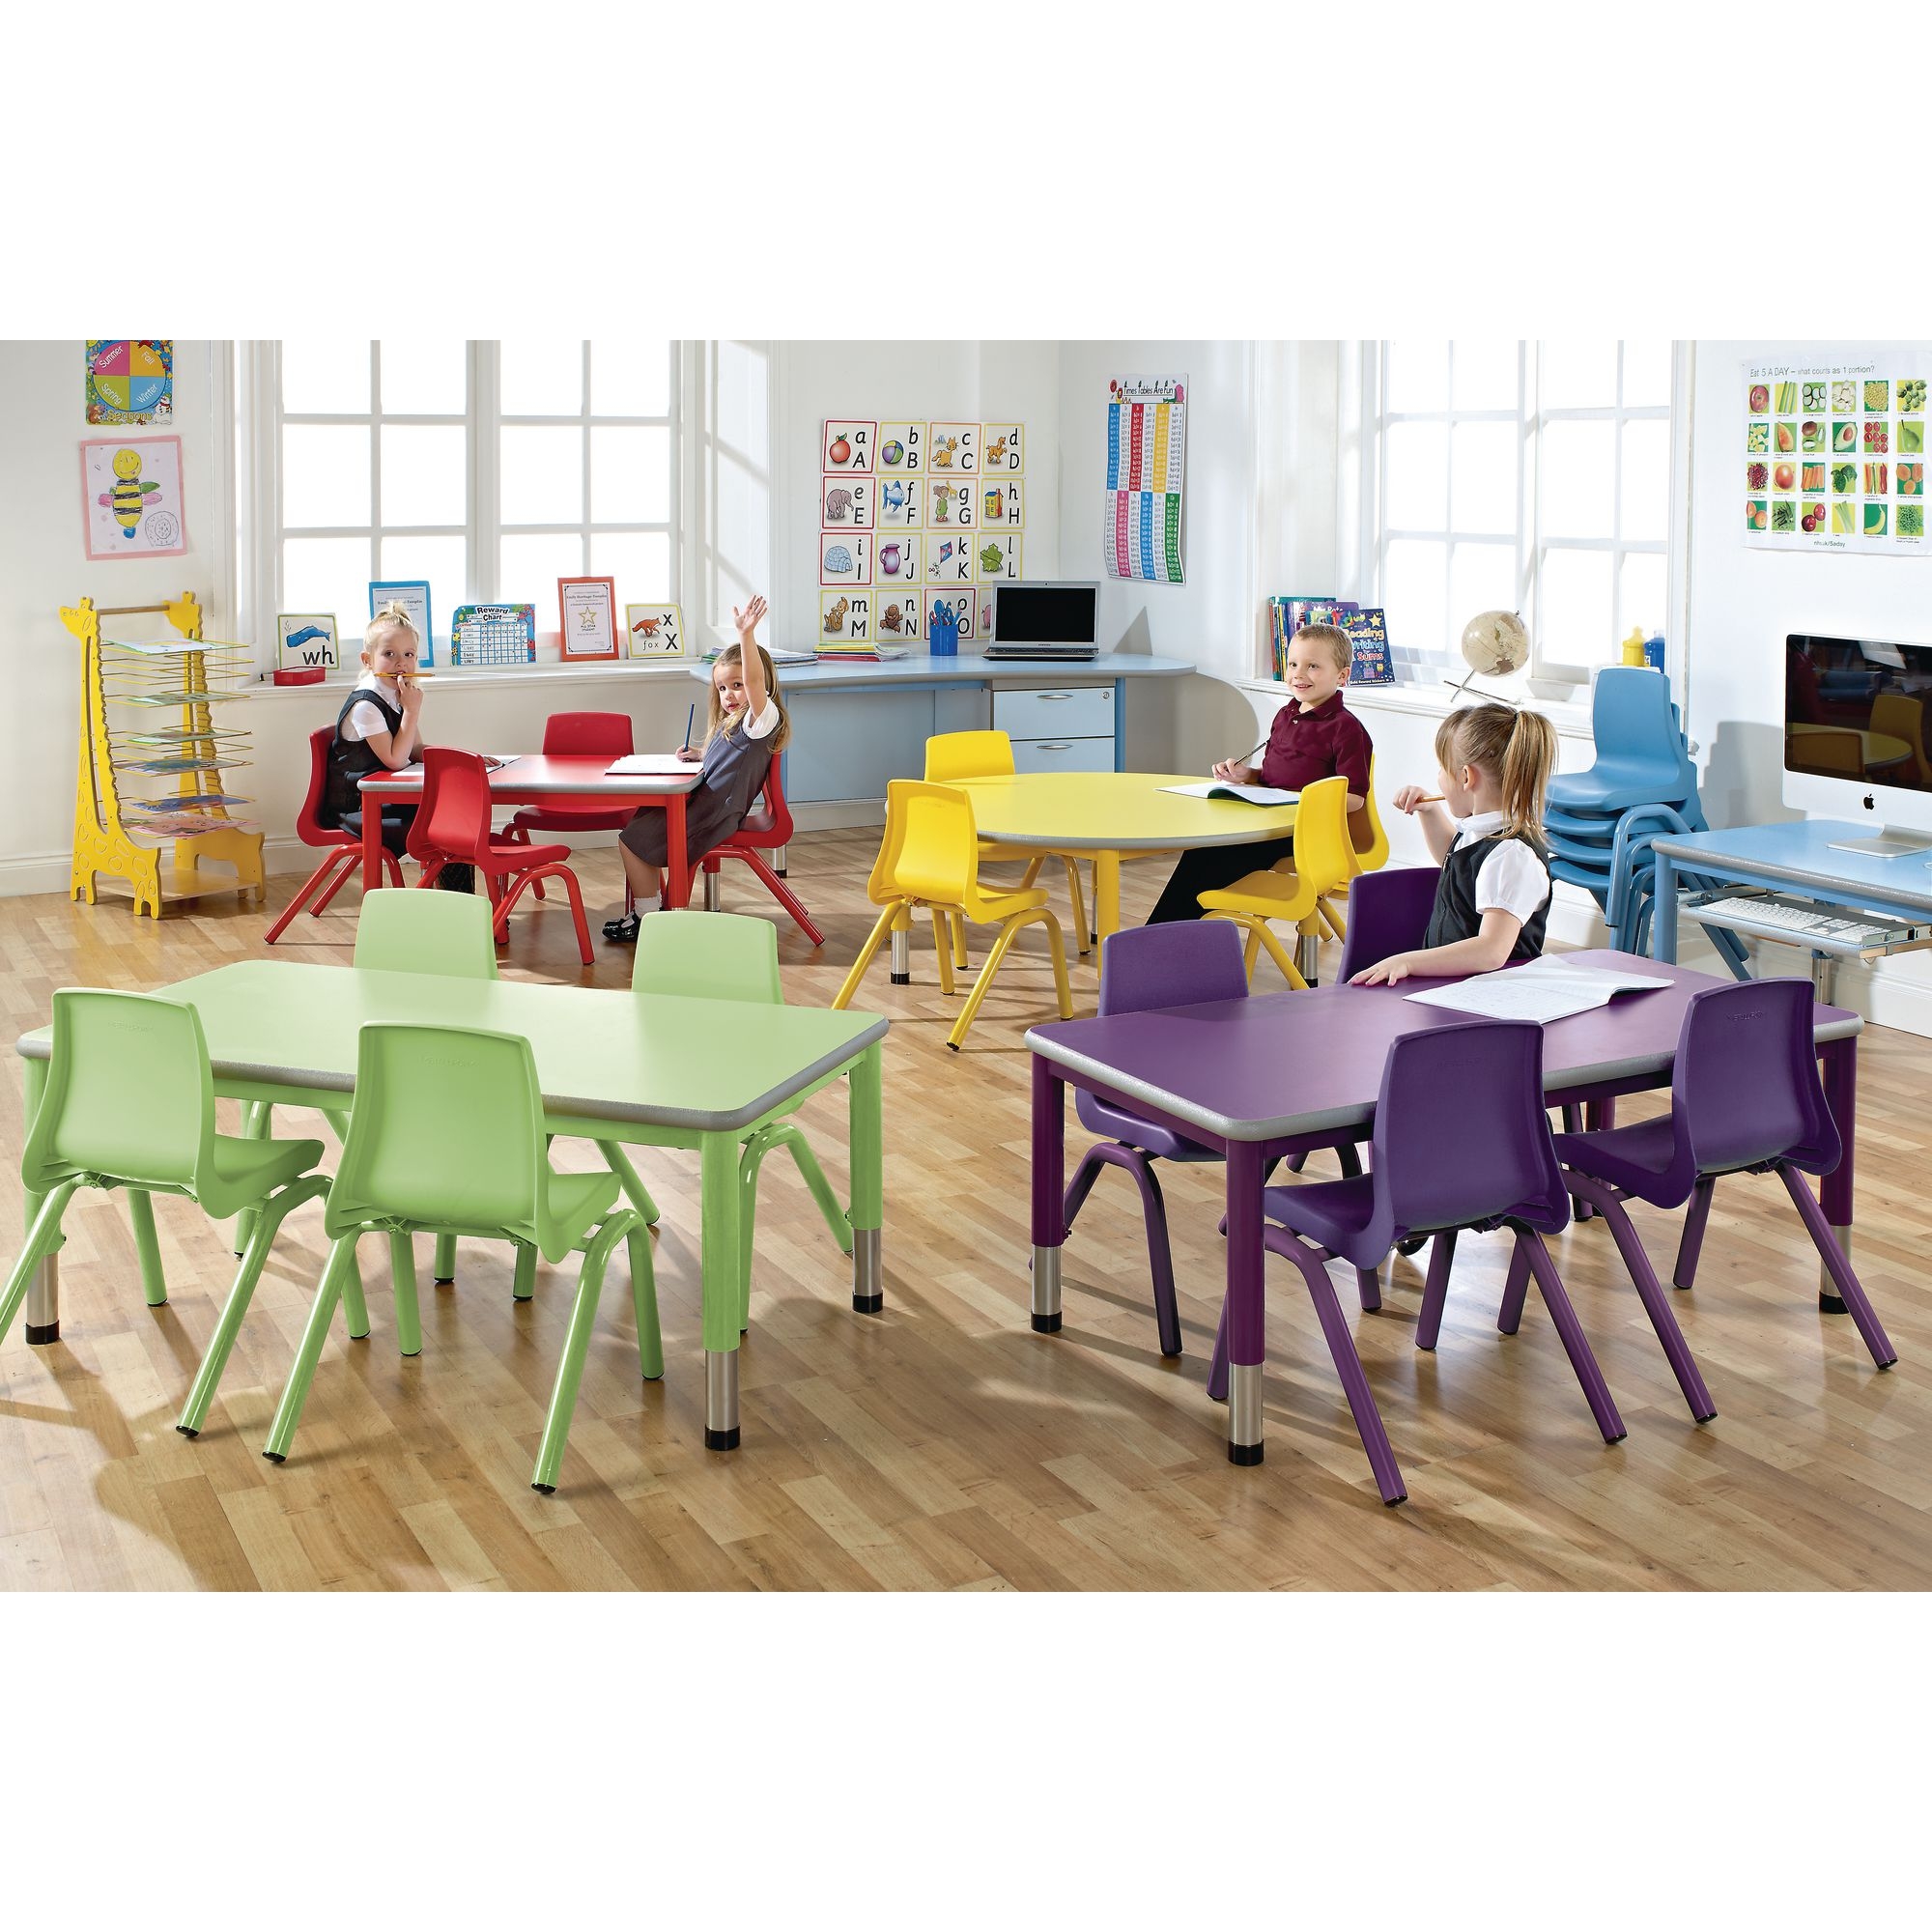 Harlequin Rectangular Height Adjustable Steel Classroom Pack: Table and 4 Chairs - 900 x 600 x 590mm - Red